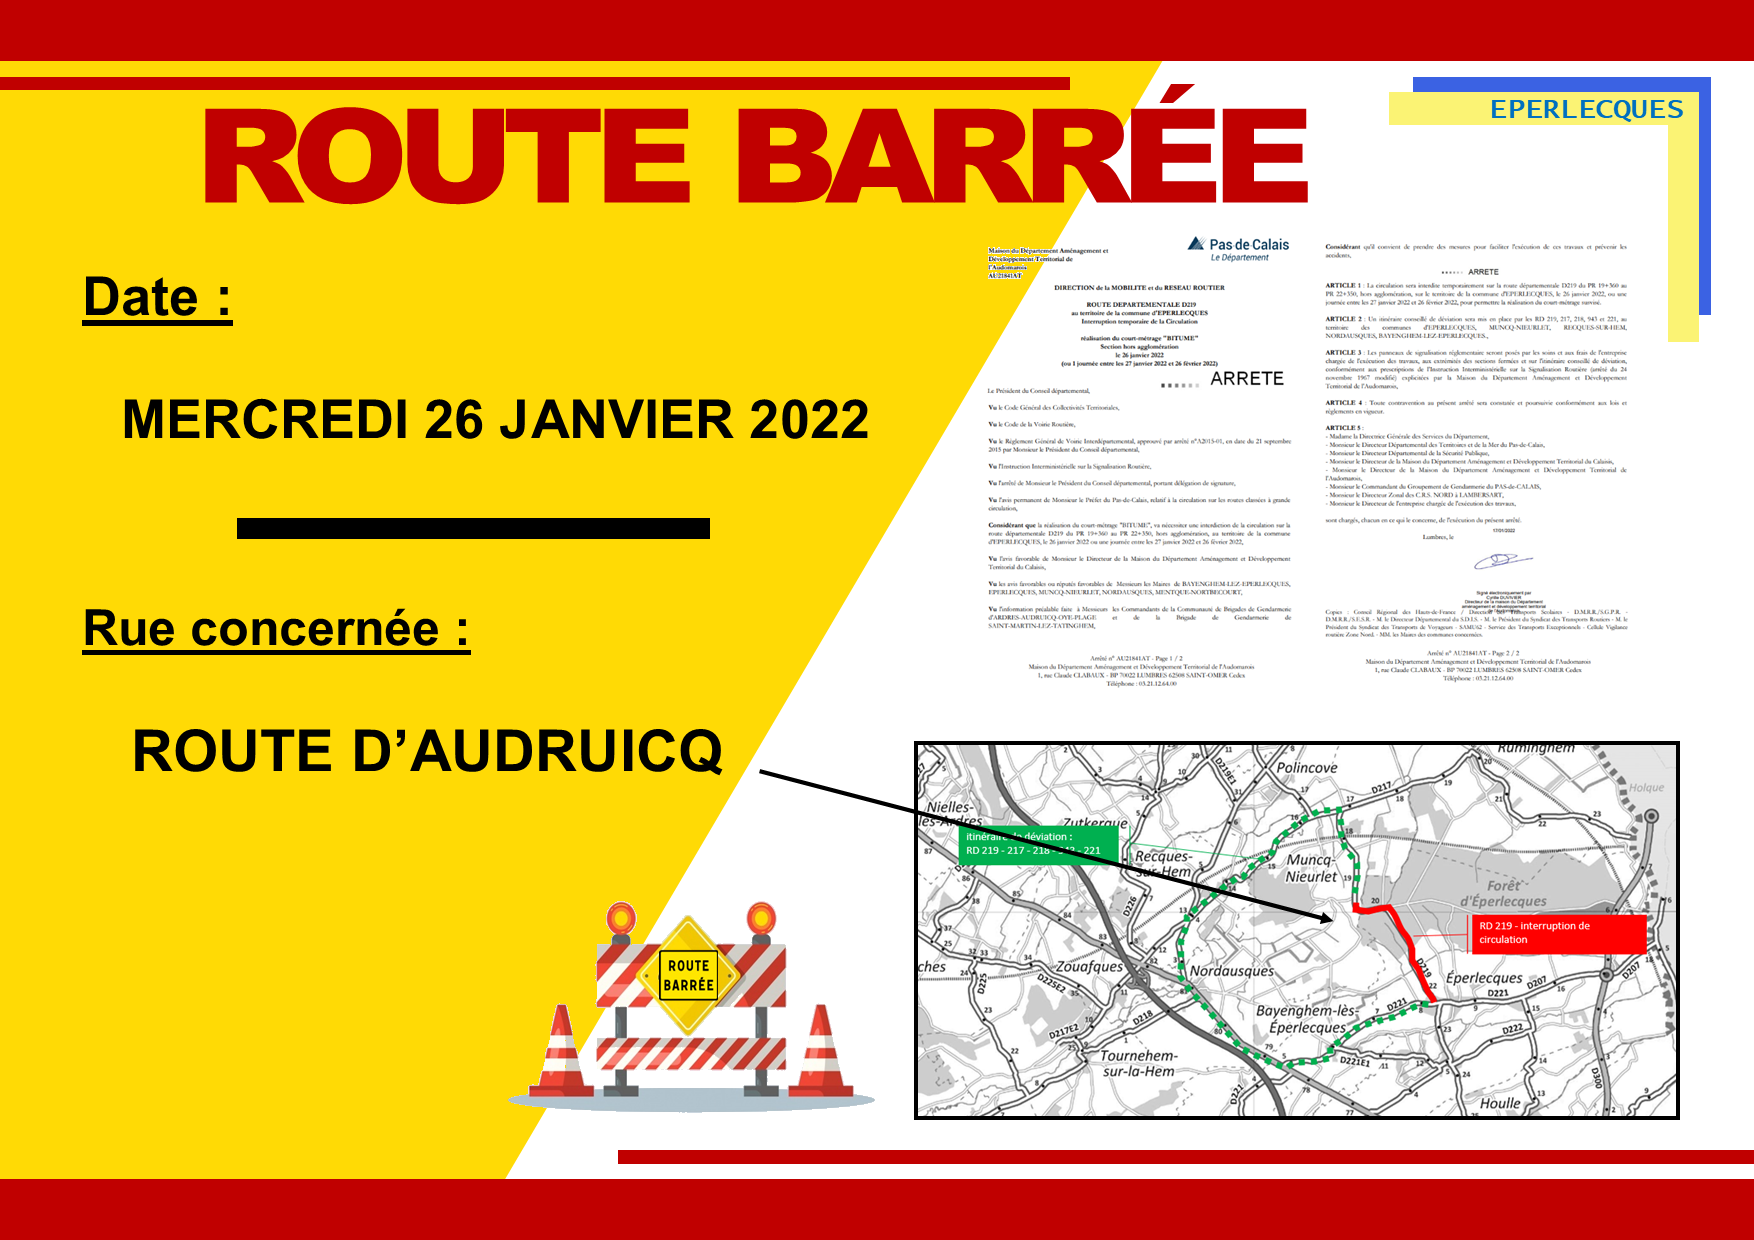 Route barree